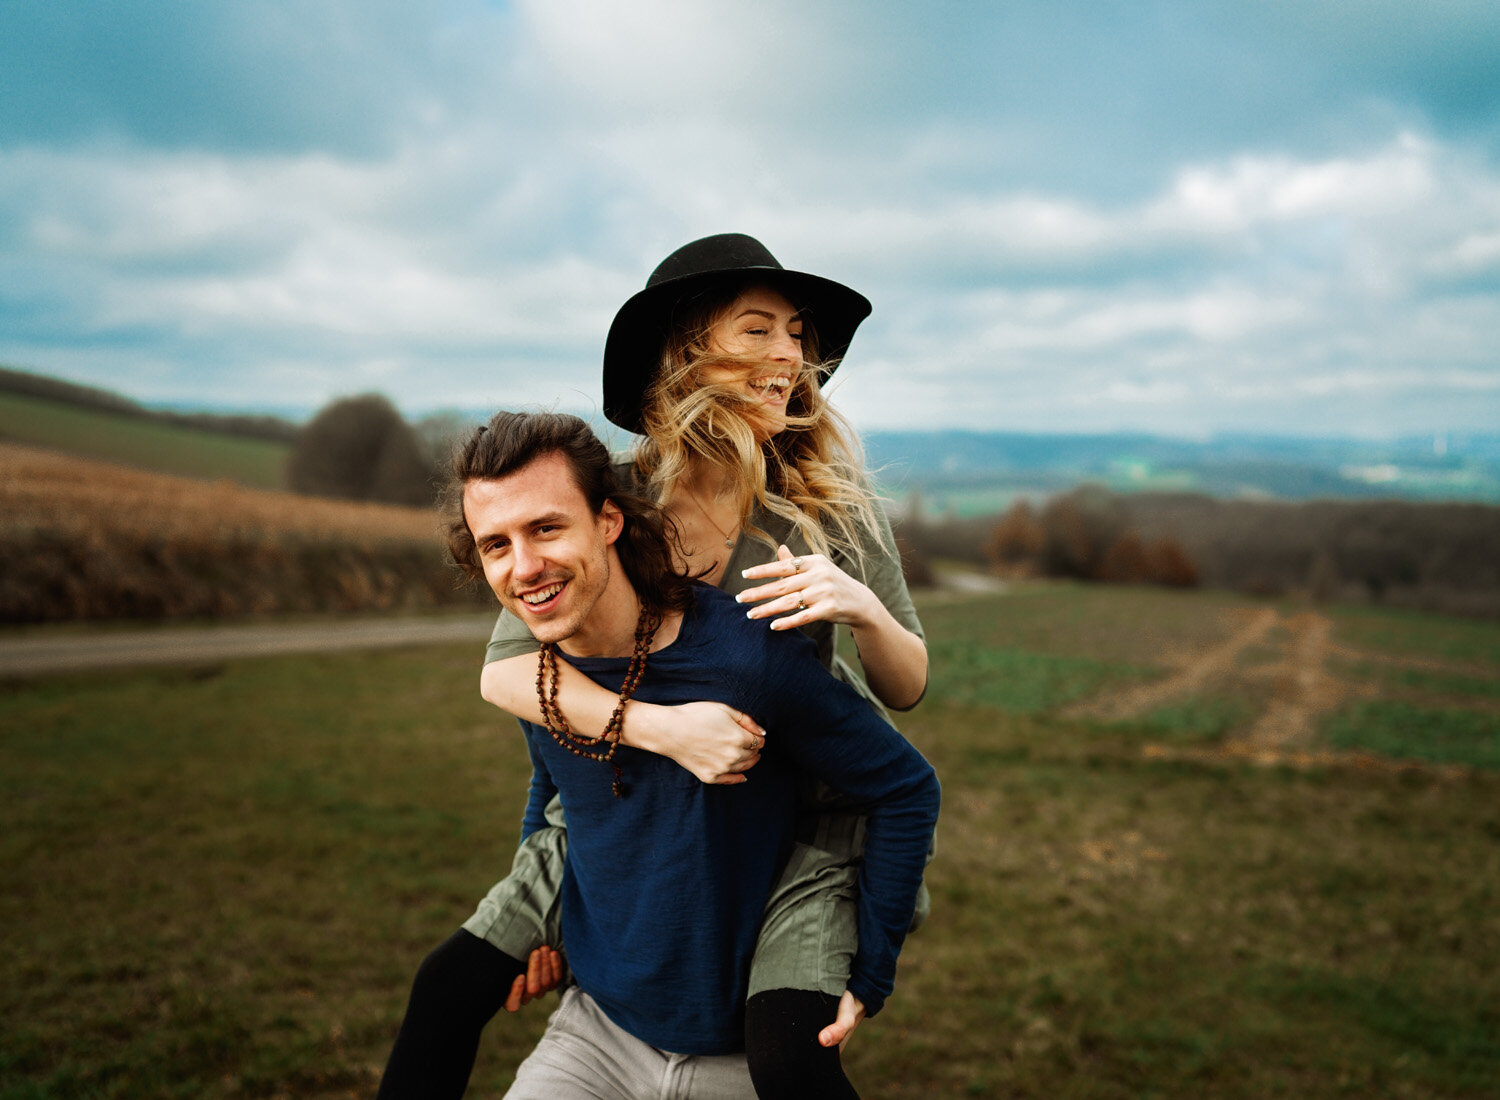  ramstein kmc engagement photographer sarah havens.  couples session in the wild on a windy fall day in kaiserslautern, rheinland-pfalz Germany 